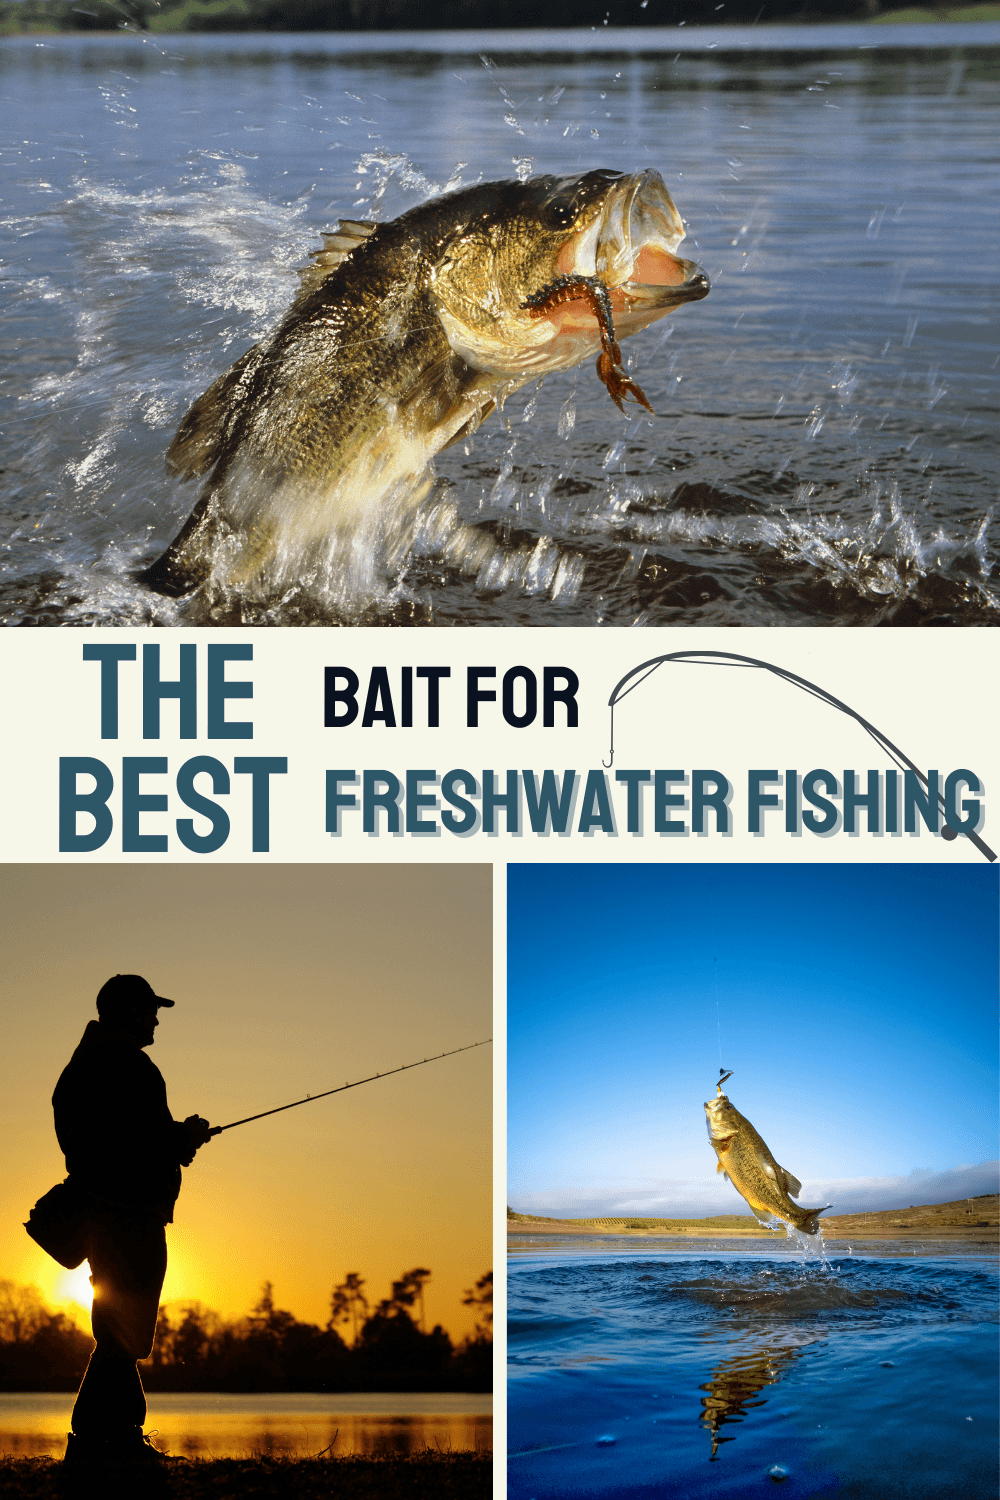 Read about the best bait for freshwater fishing!